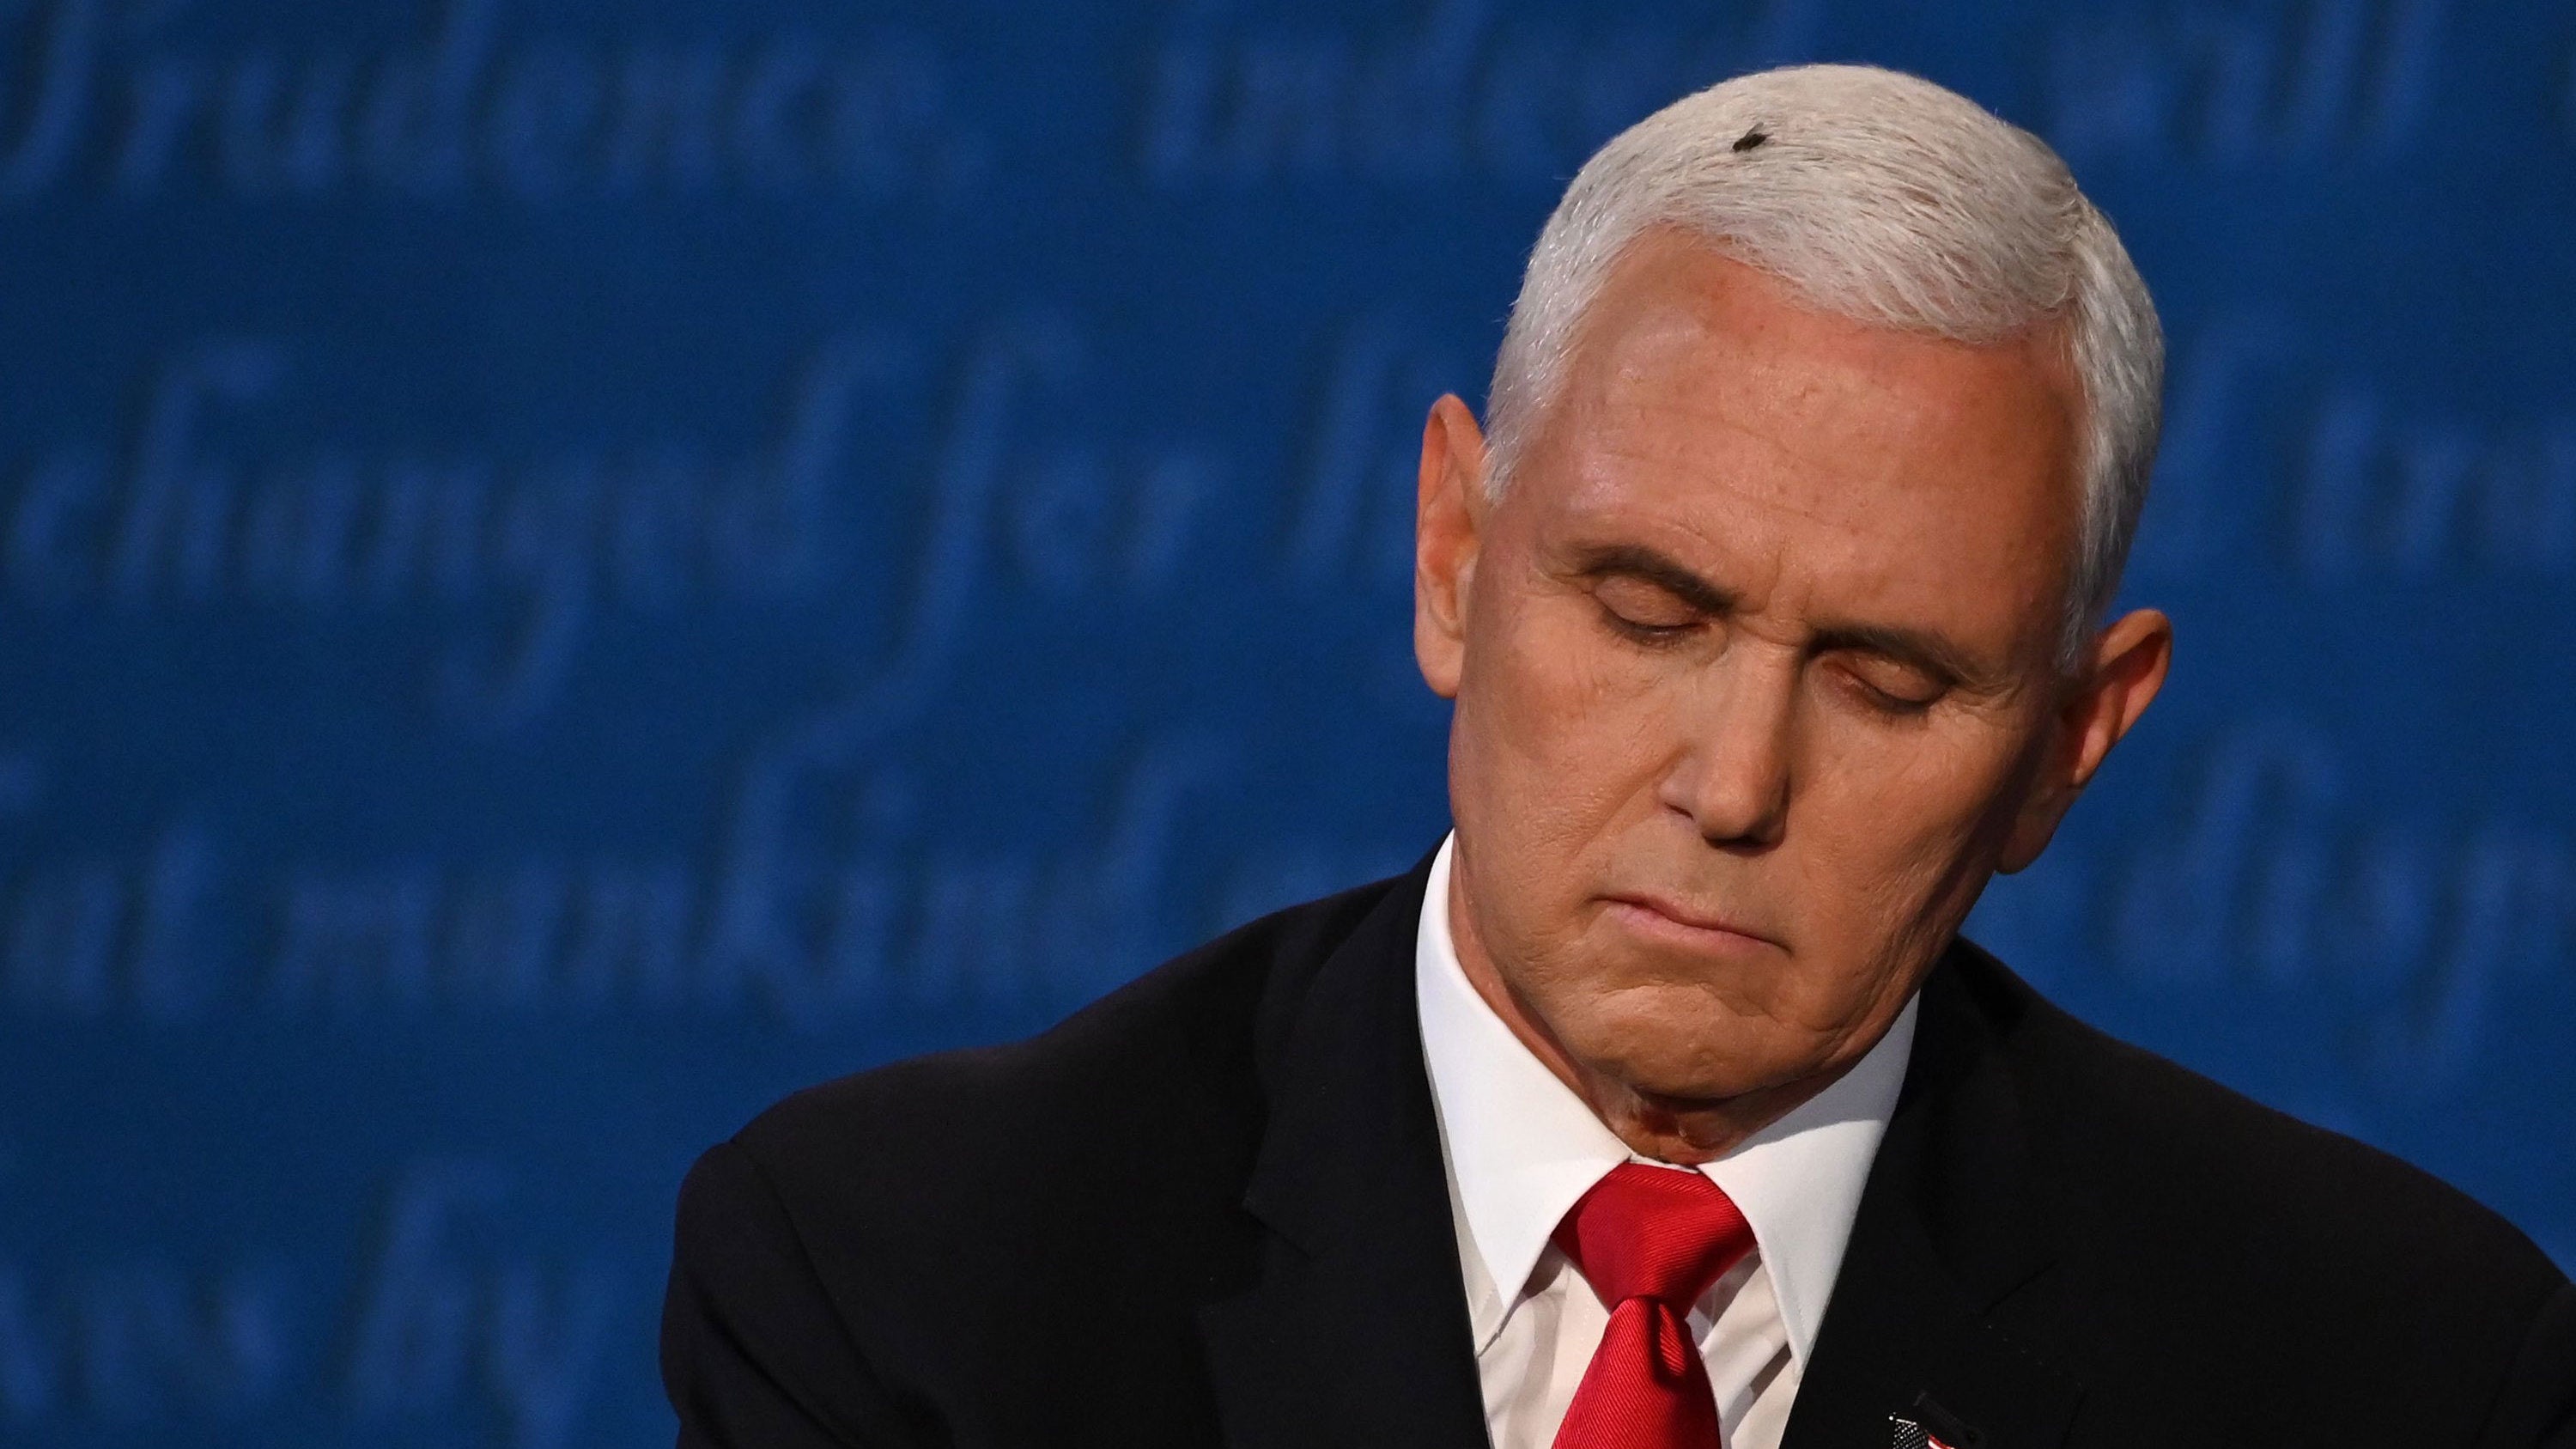 A fly lands on Vice President Mike Pence's head during the debate.